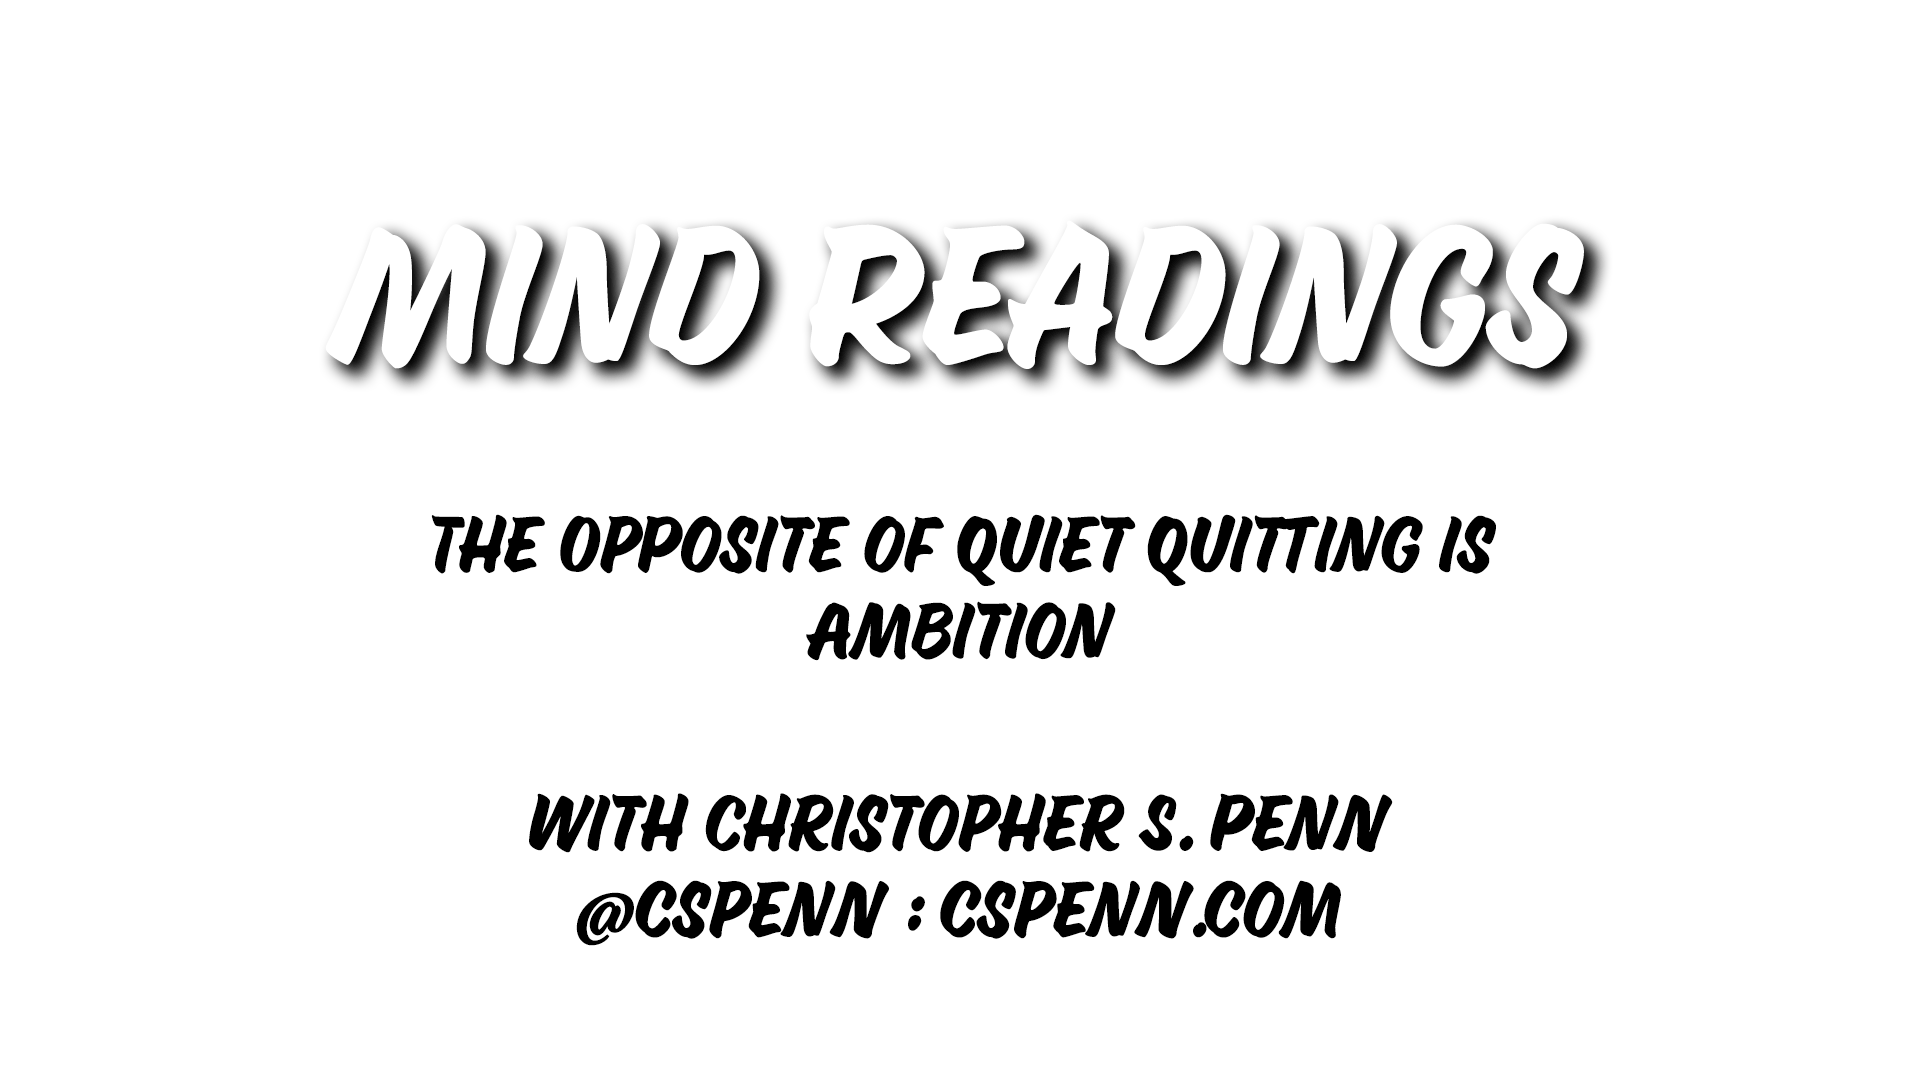 Mind Readings: The Opposite of Quiet Quitting is Ambition